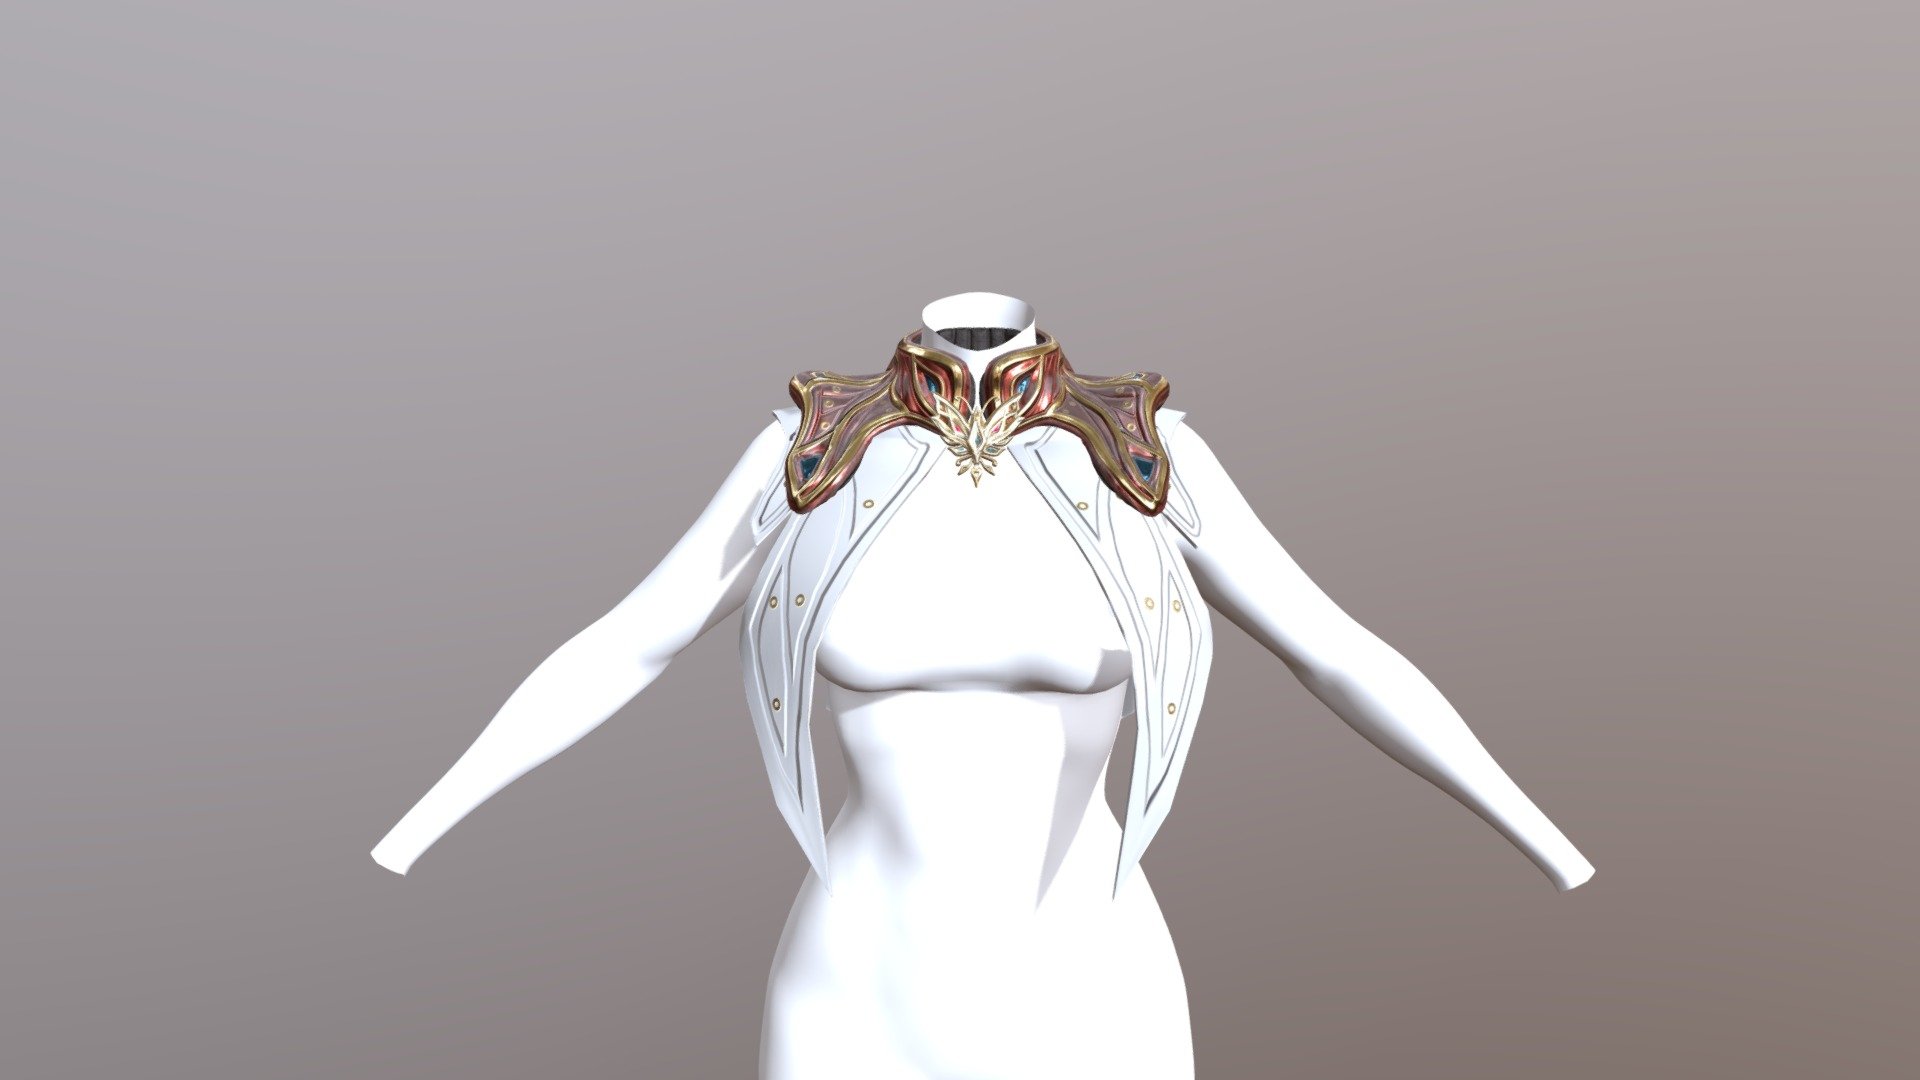 Avatall Eve Armor Neck Elebrith
2023 by Pocolov Studio 
Elebrith Armor Set
Artist: Giang



Include: Hires model and Substance File - Avatall Eve Armor Neck Elebrith - Buy Royalty Free 3D model by pocolov 3d model